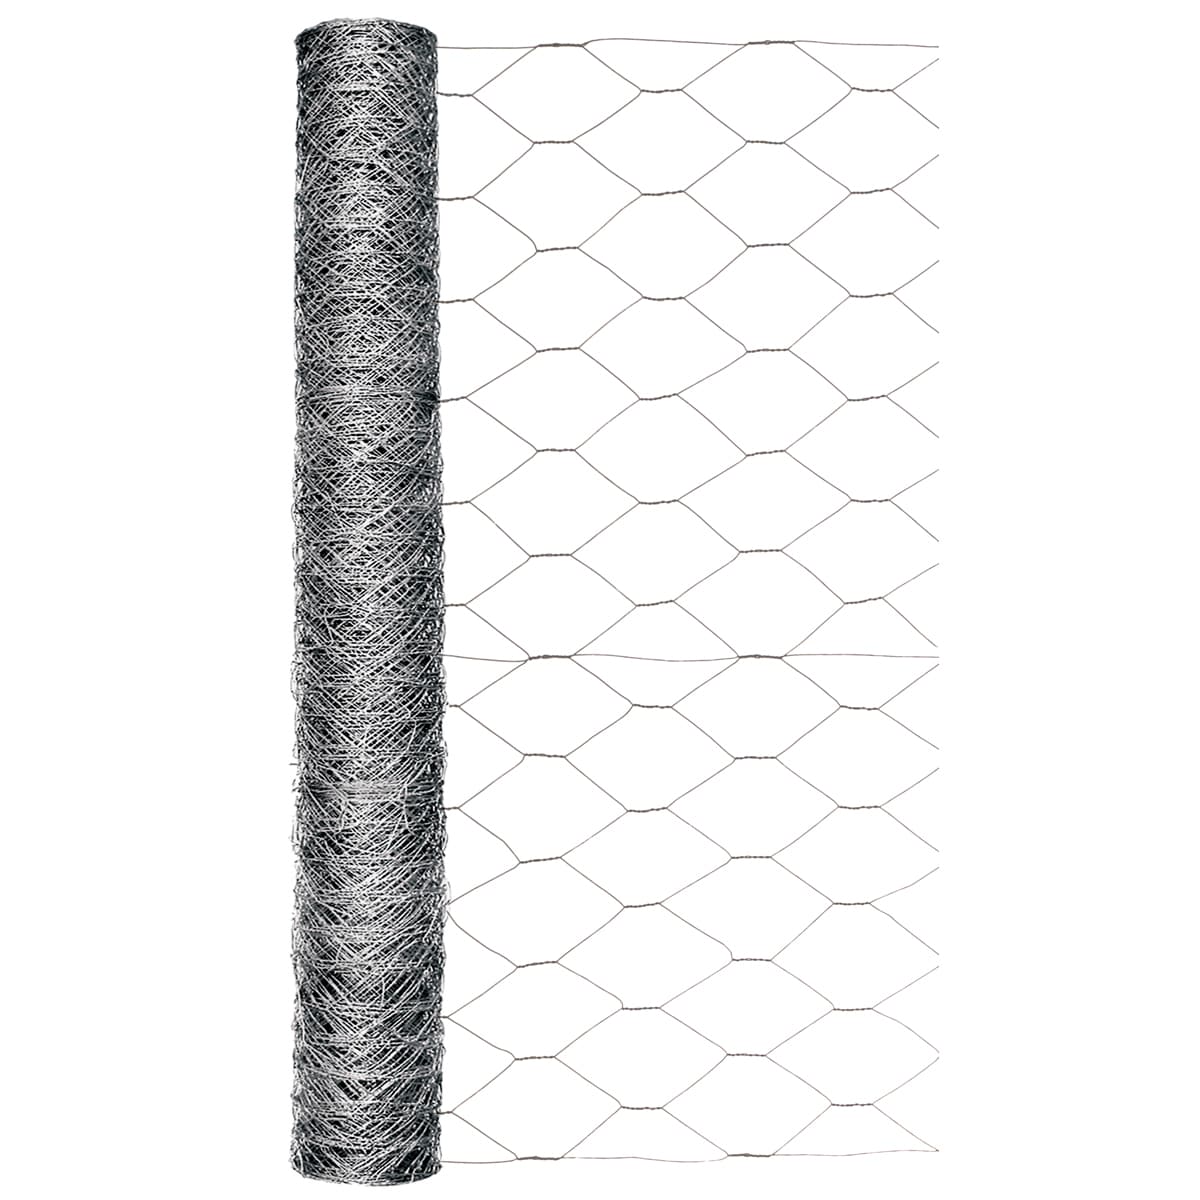 GI Chicken Wire Fencing、Livestock Fencing Roll、 Ideal for